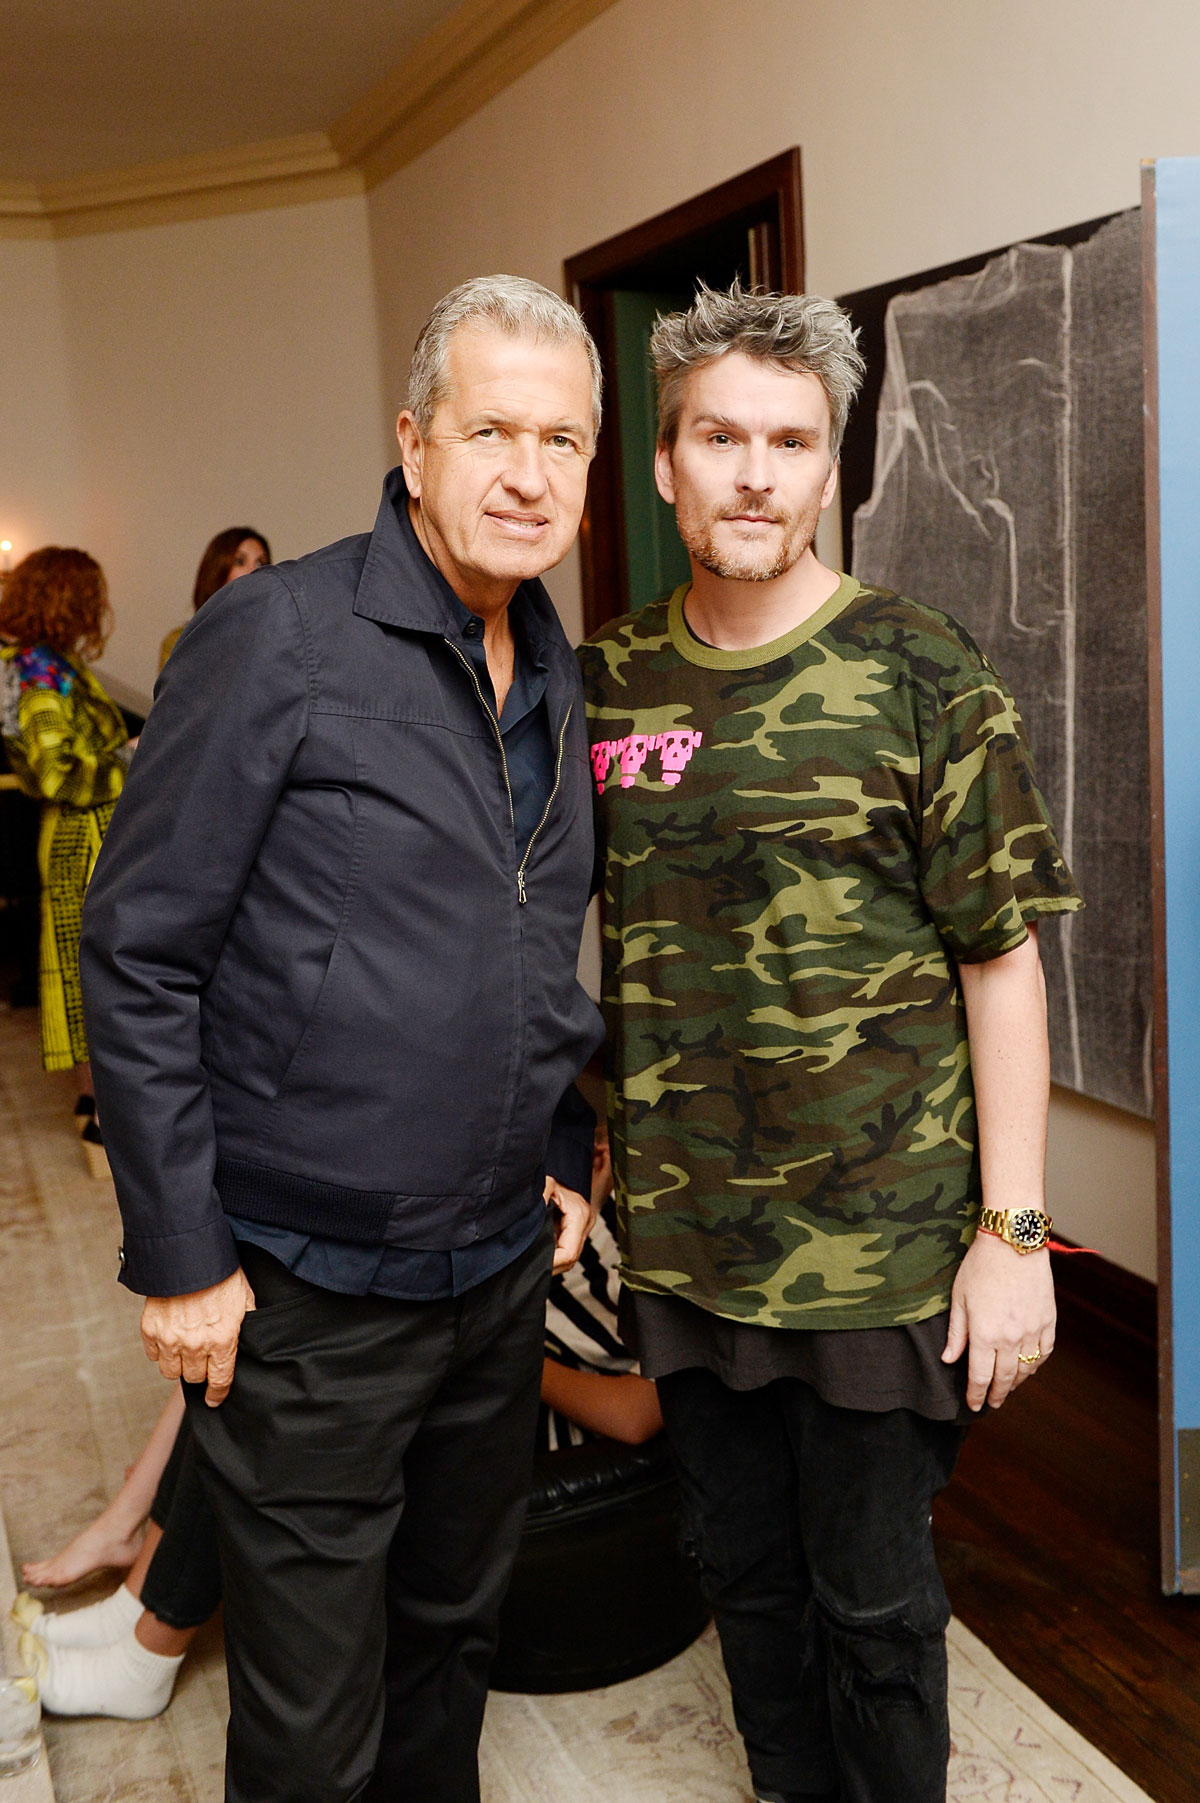  Mario Testino and Balthazar Getty celebrate the launch of London Uprising Fifty Fashion Designers One City on April 18, 2017 in Los Angeles, California. (Photo by Stefanie Keenan/Getty Images for Tania Fares)